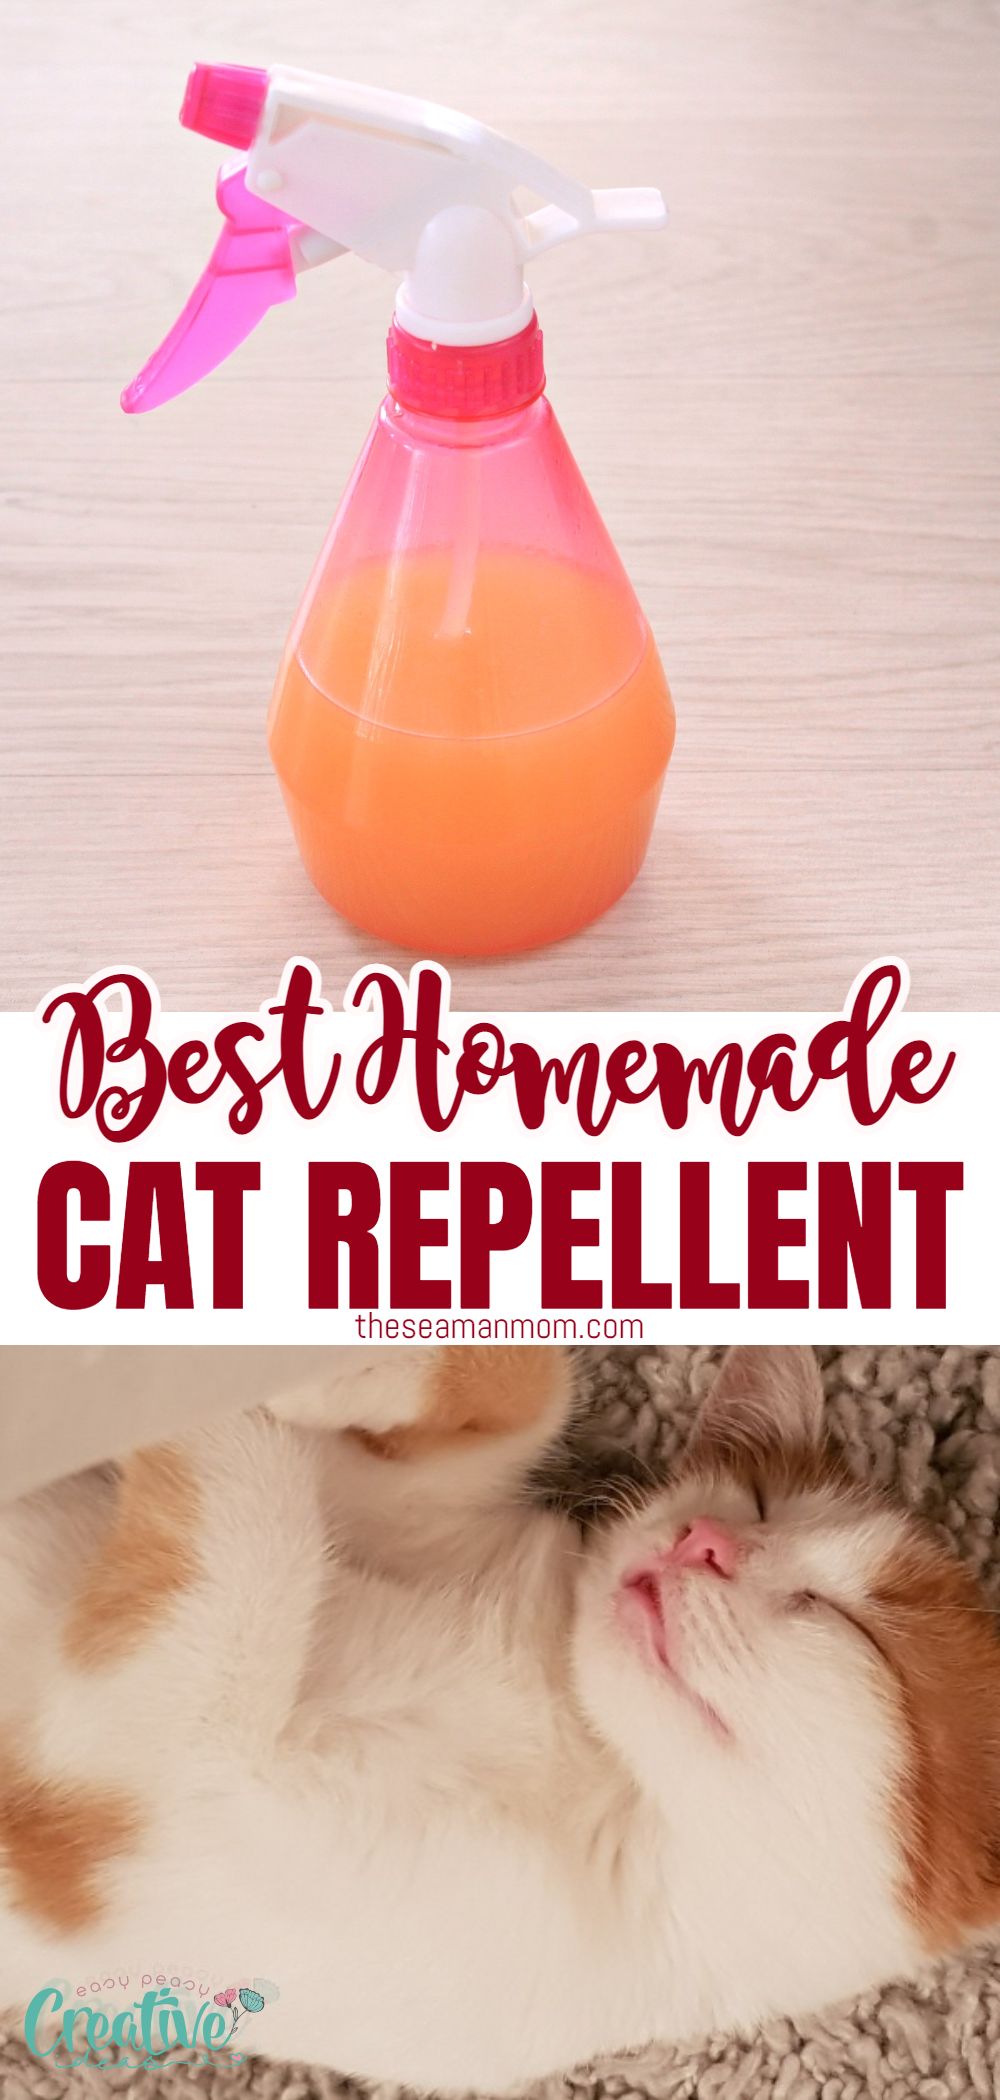 Tired of being frustrated with cats messing around your garden or home? Make a friendly but efficient natural cat repellent in just a few minutes! This cat deterrent is made with a handful of few simple, affordable ingredients and won't hurt the environment! via @petroneagu